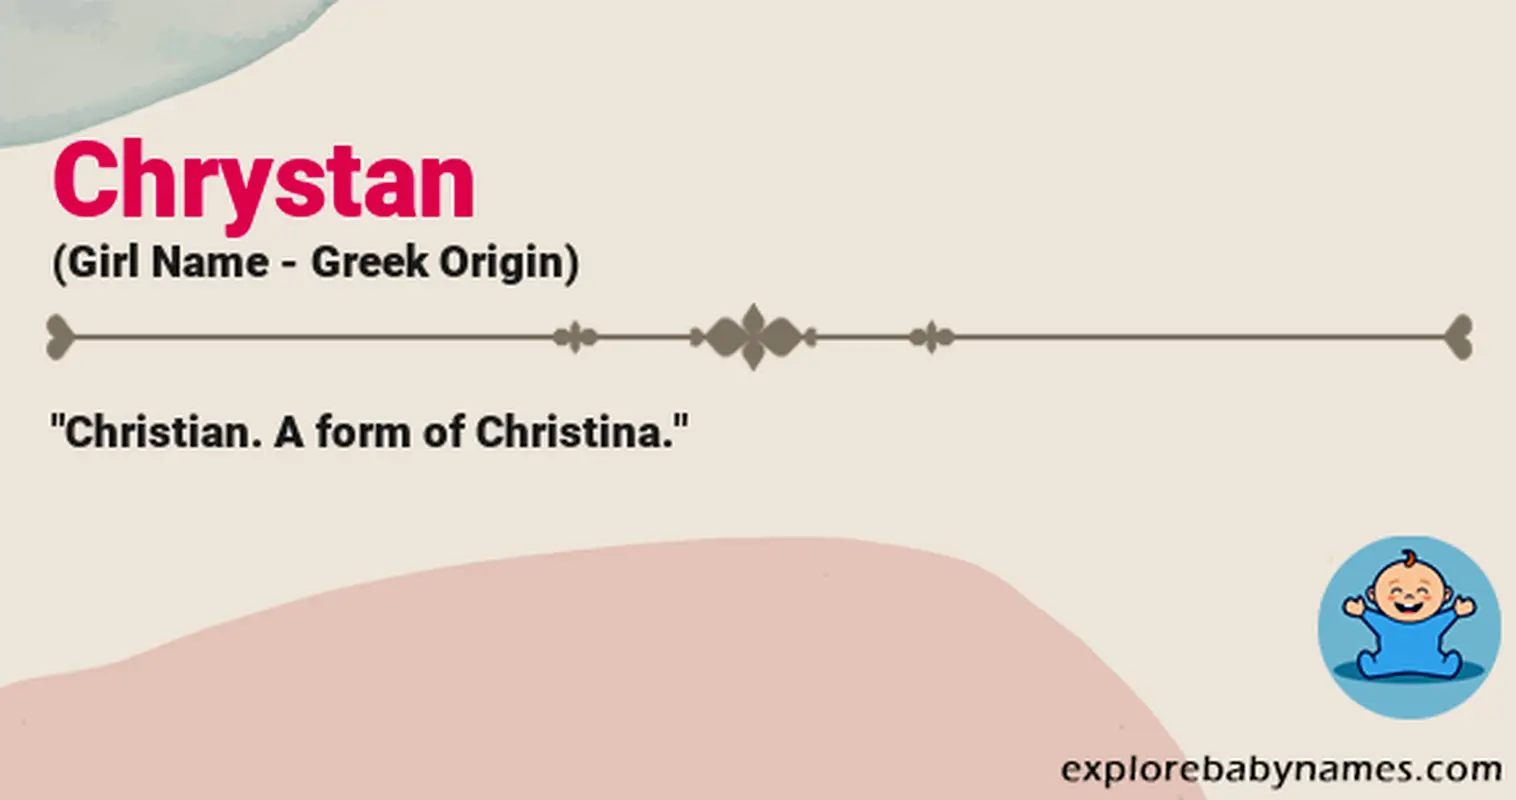 Meaning of Chrystan